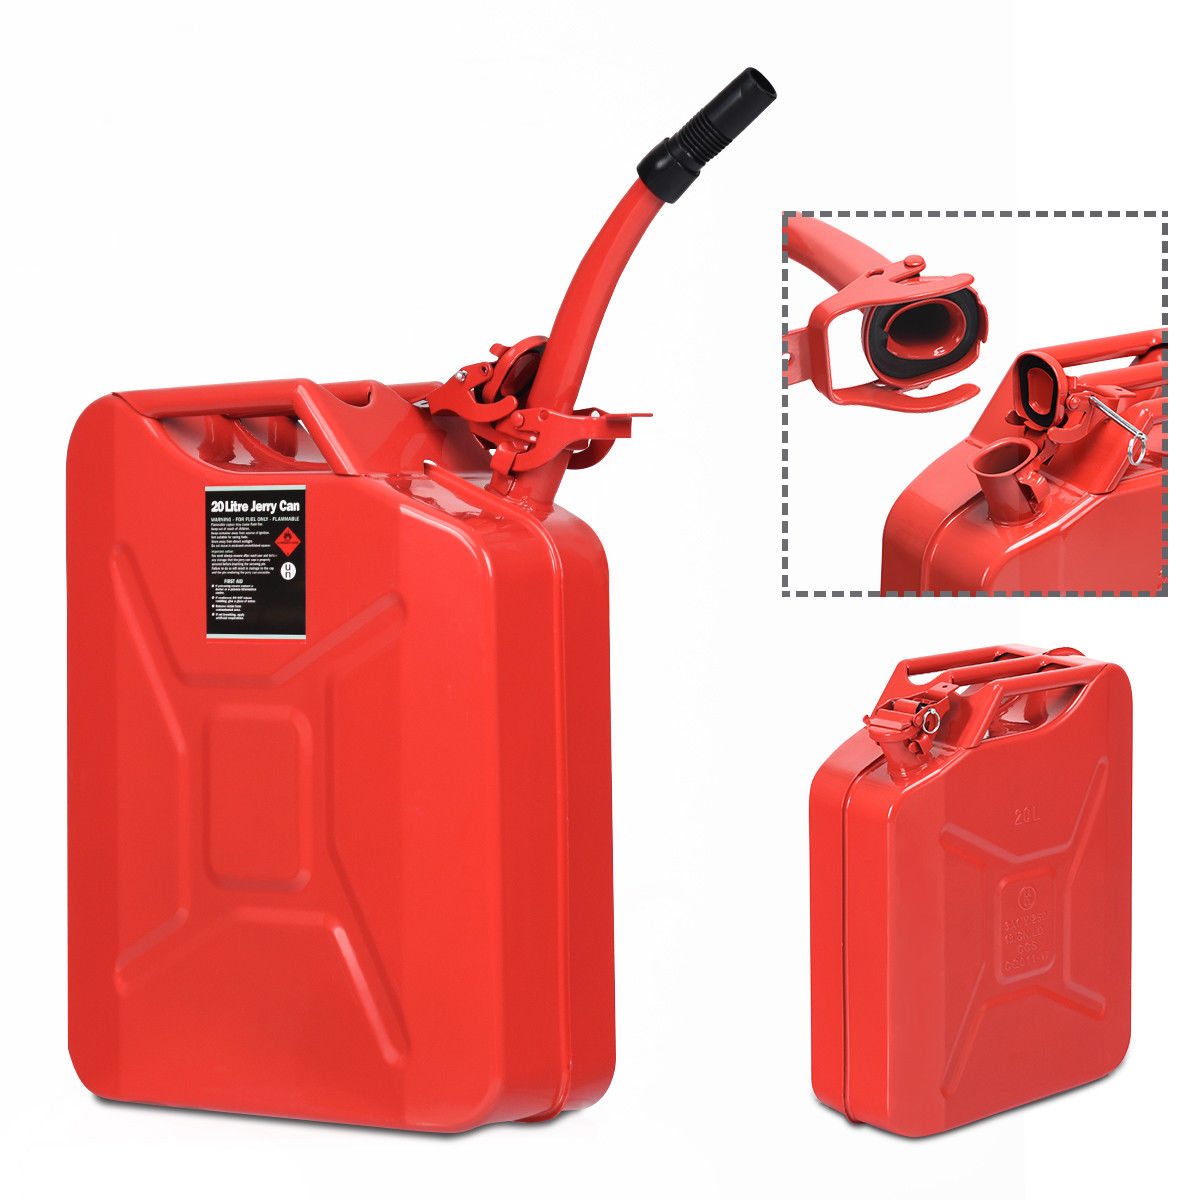 5 Gallon 20L Jerry Fuel Can Steel Gas Container Emergency Backup W/ Spout Red